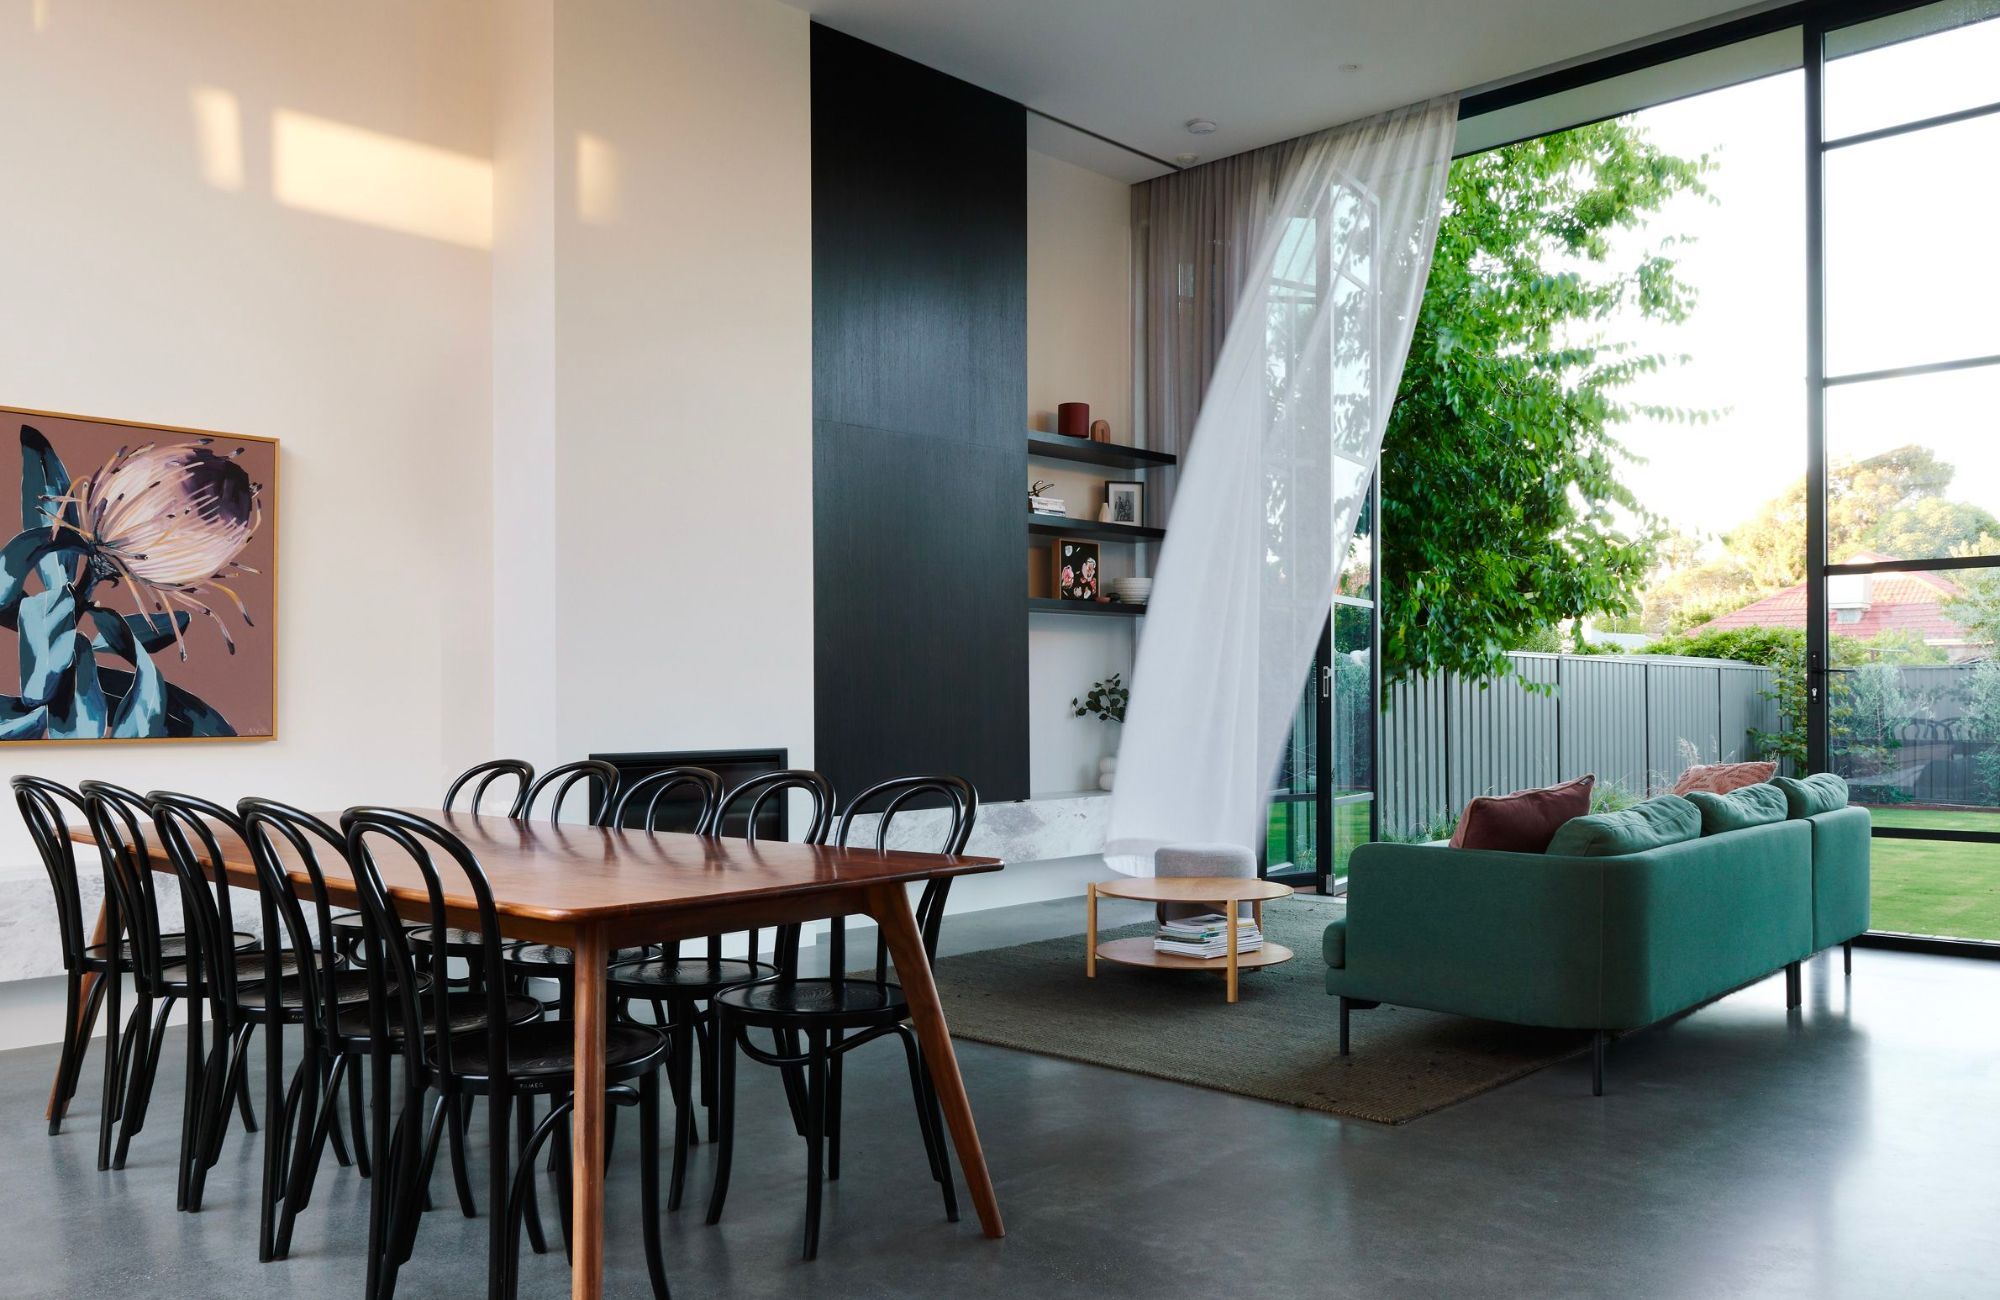 Garden House by Atelier Bond showing interior of the dining and living space looking out to the backyard